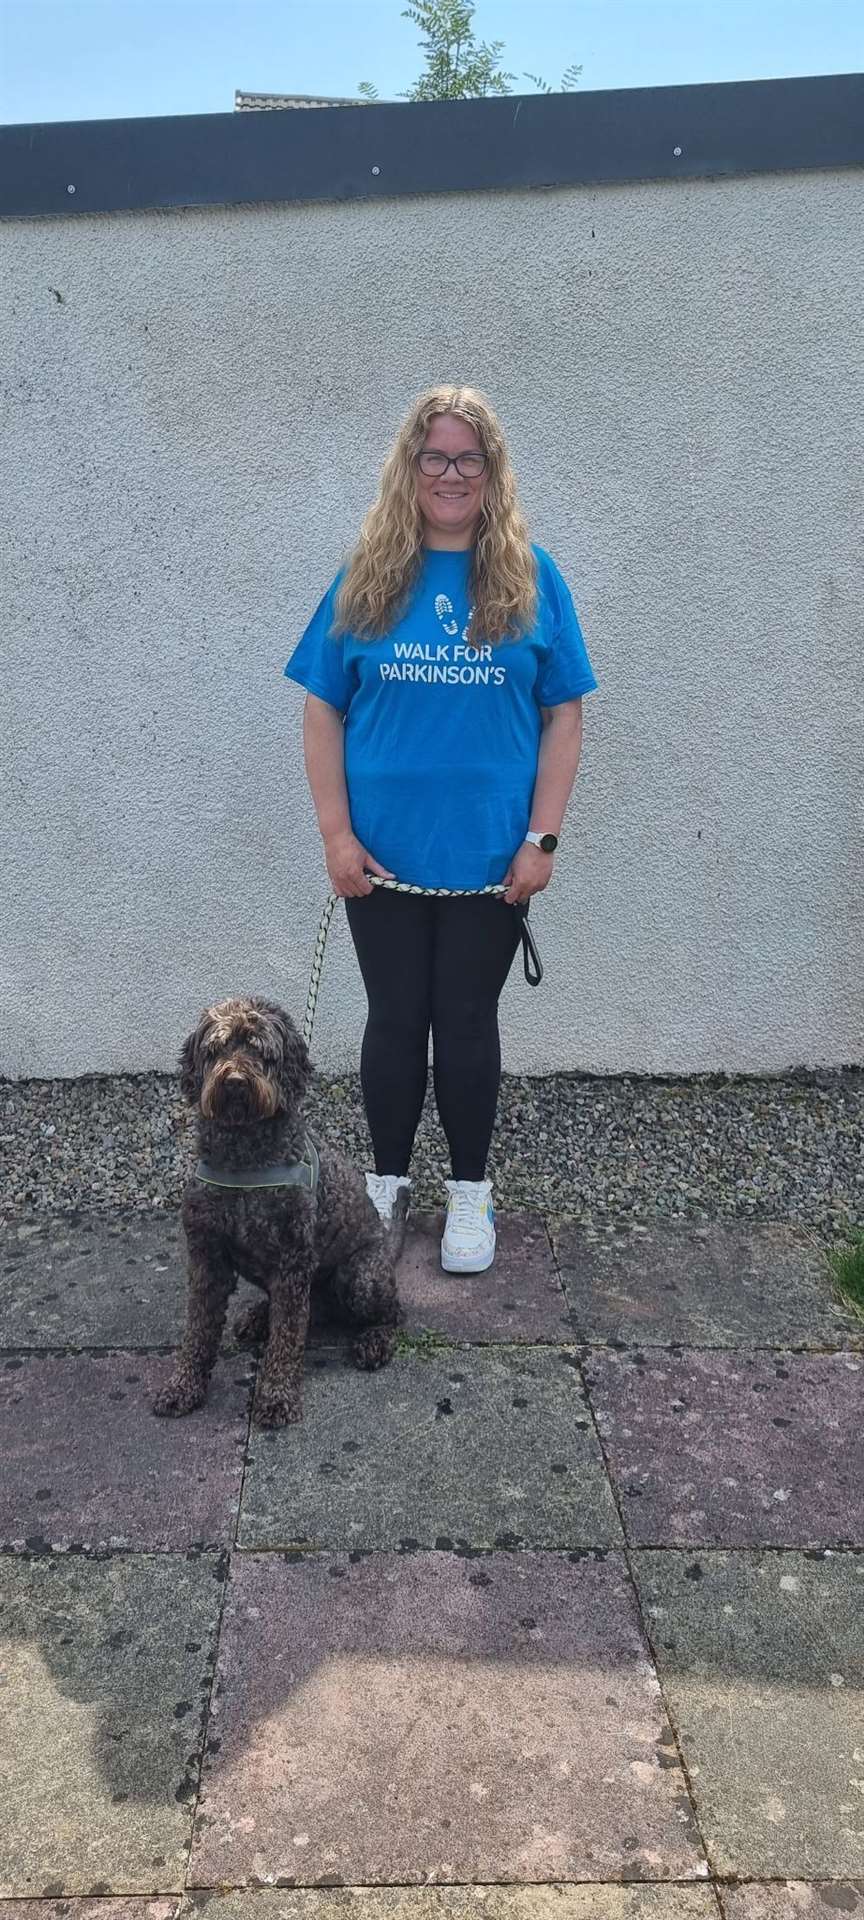 Kirsteen Wood is doing a Walk for Parkinson's in memory of her father, Hamish Wood.